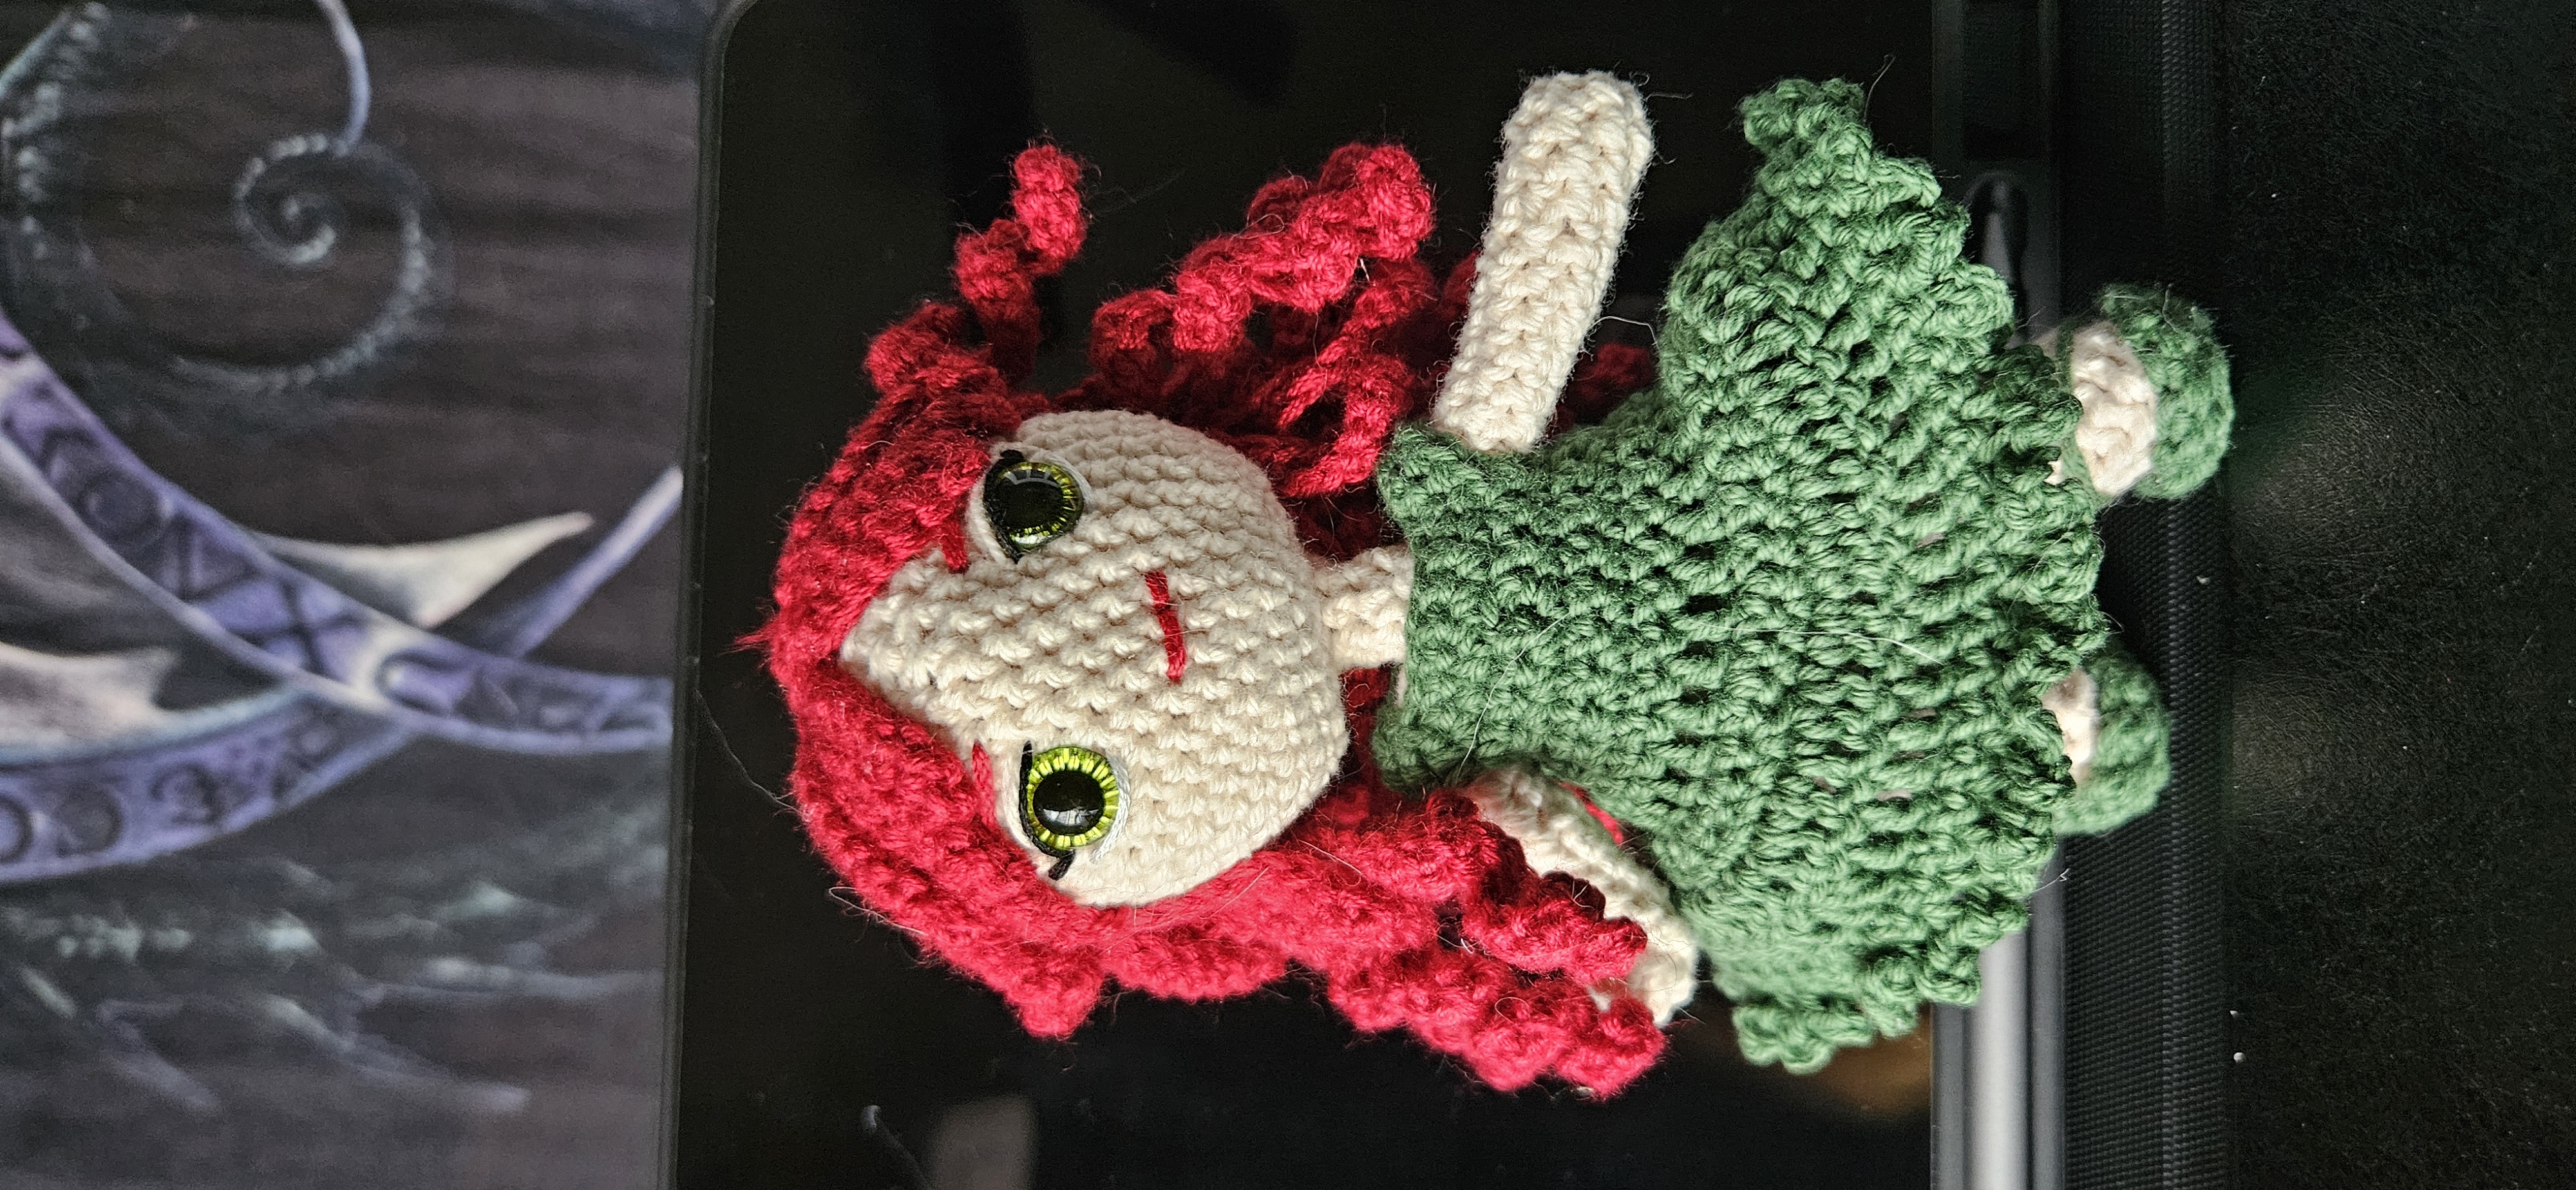 a knitted doll with red hair